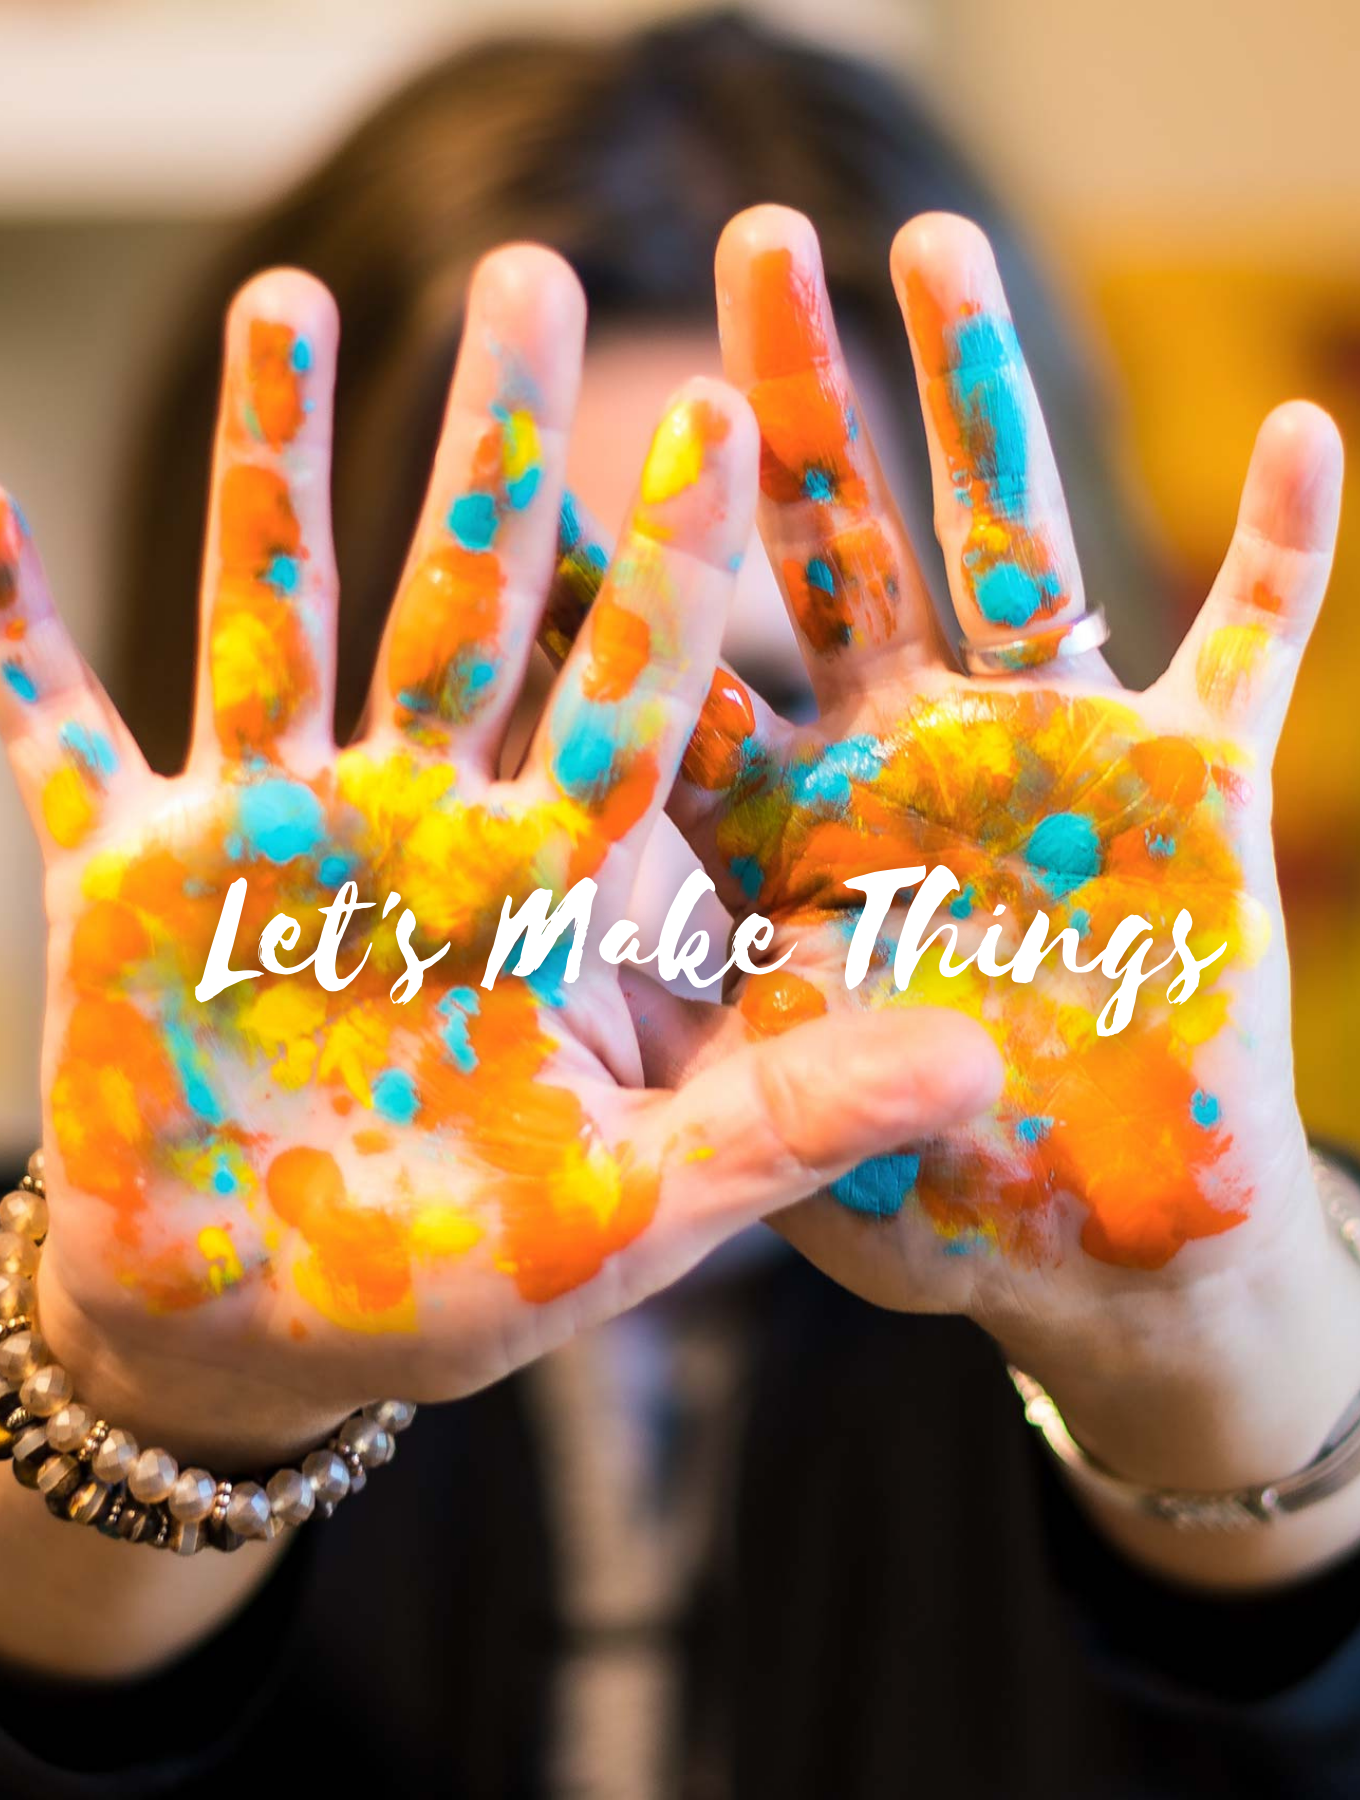 Painted hands with the words "let's make things"